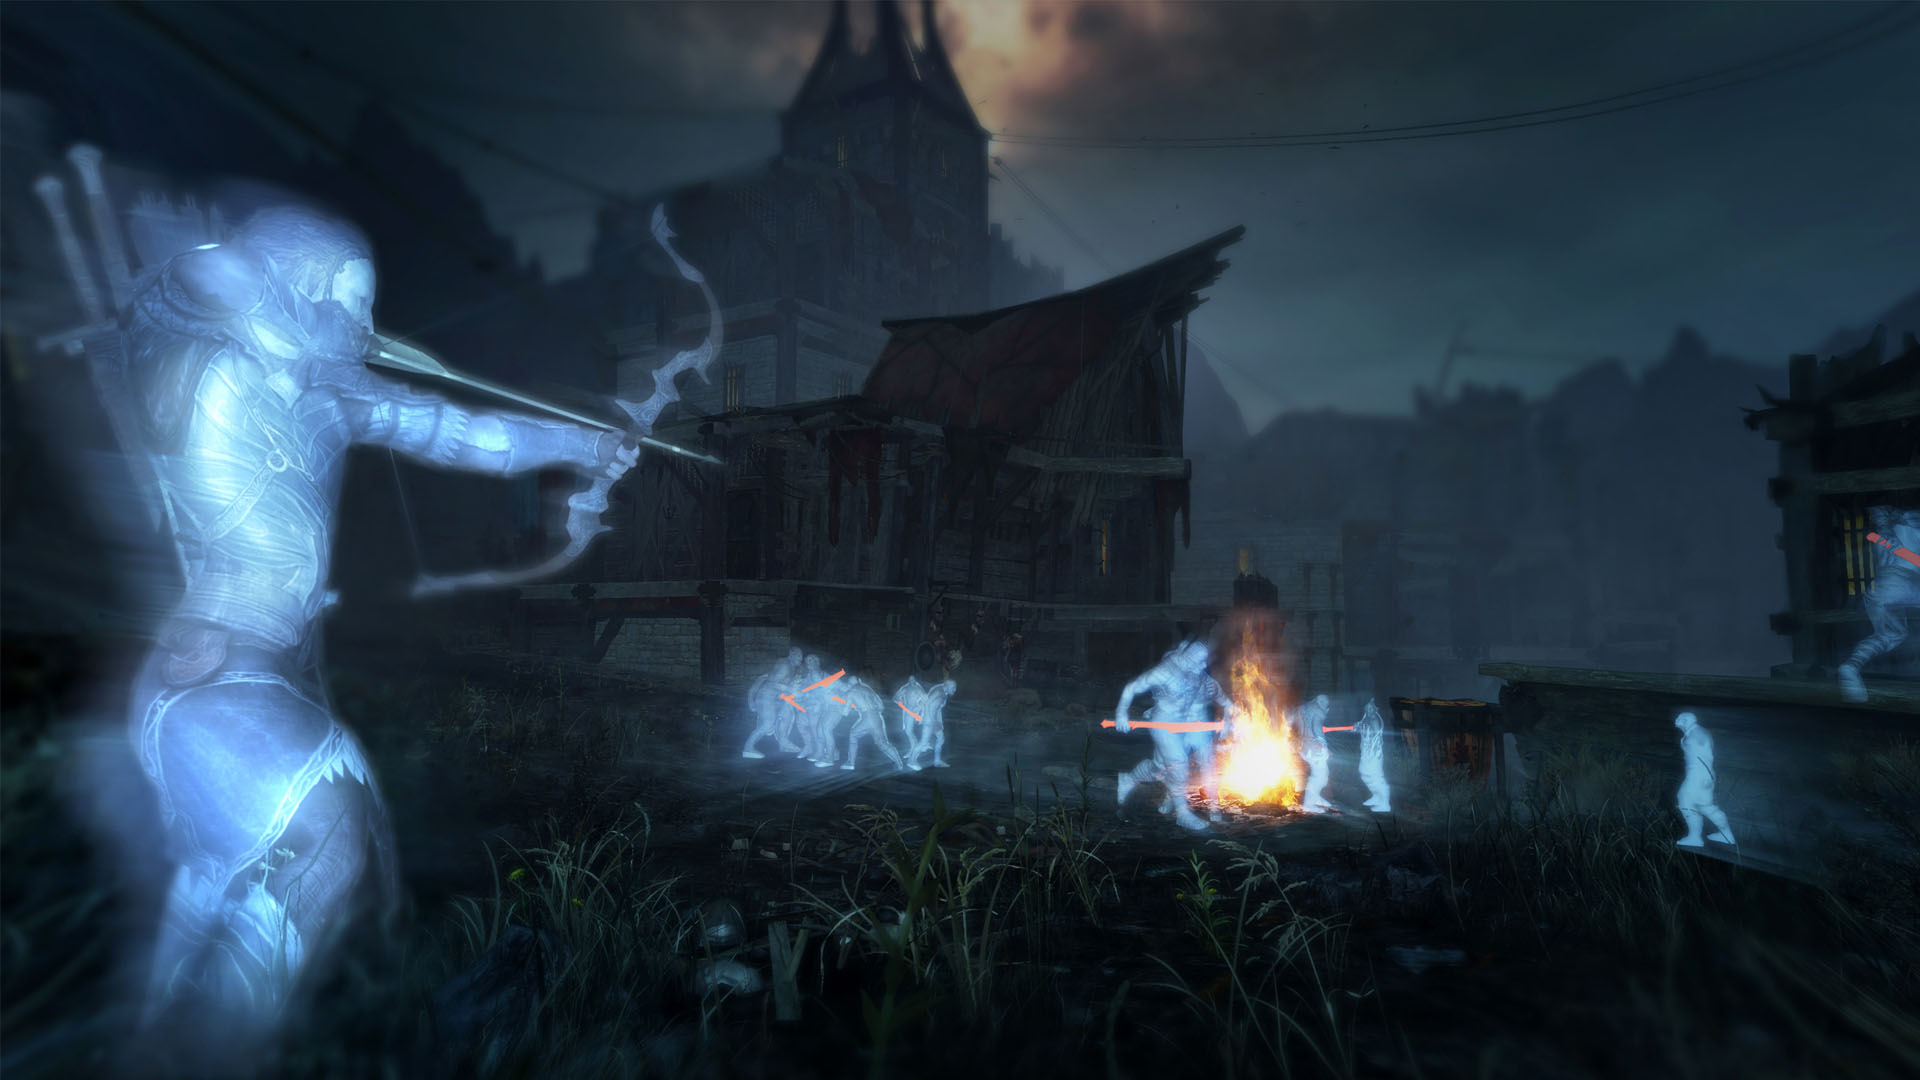 Middle-earth: Shadow of Mordor GOTY Edition for PC Review